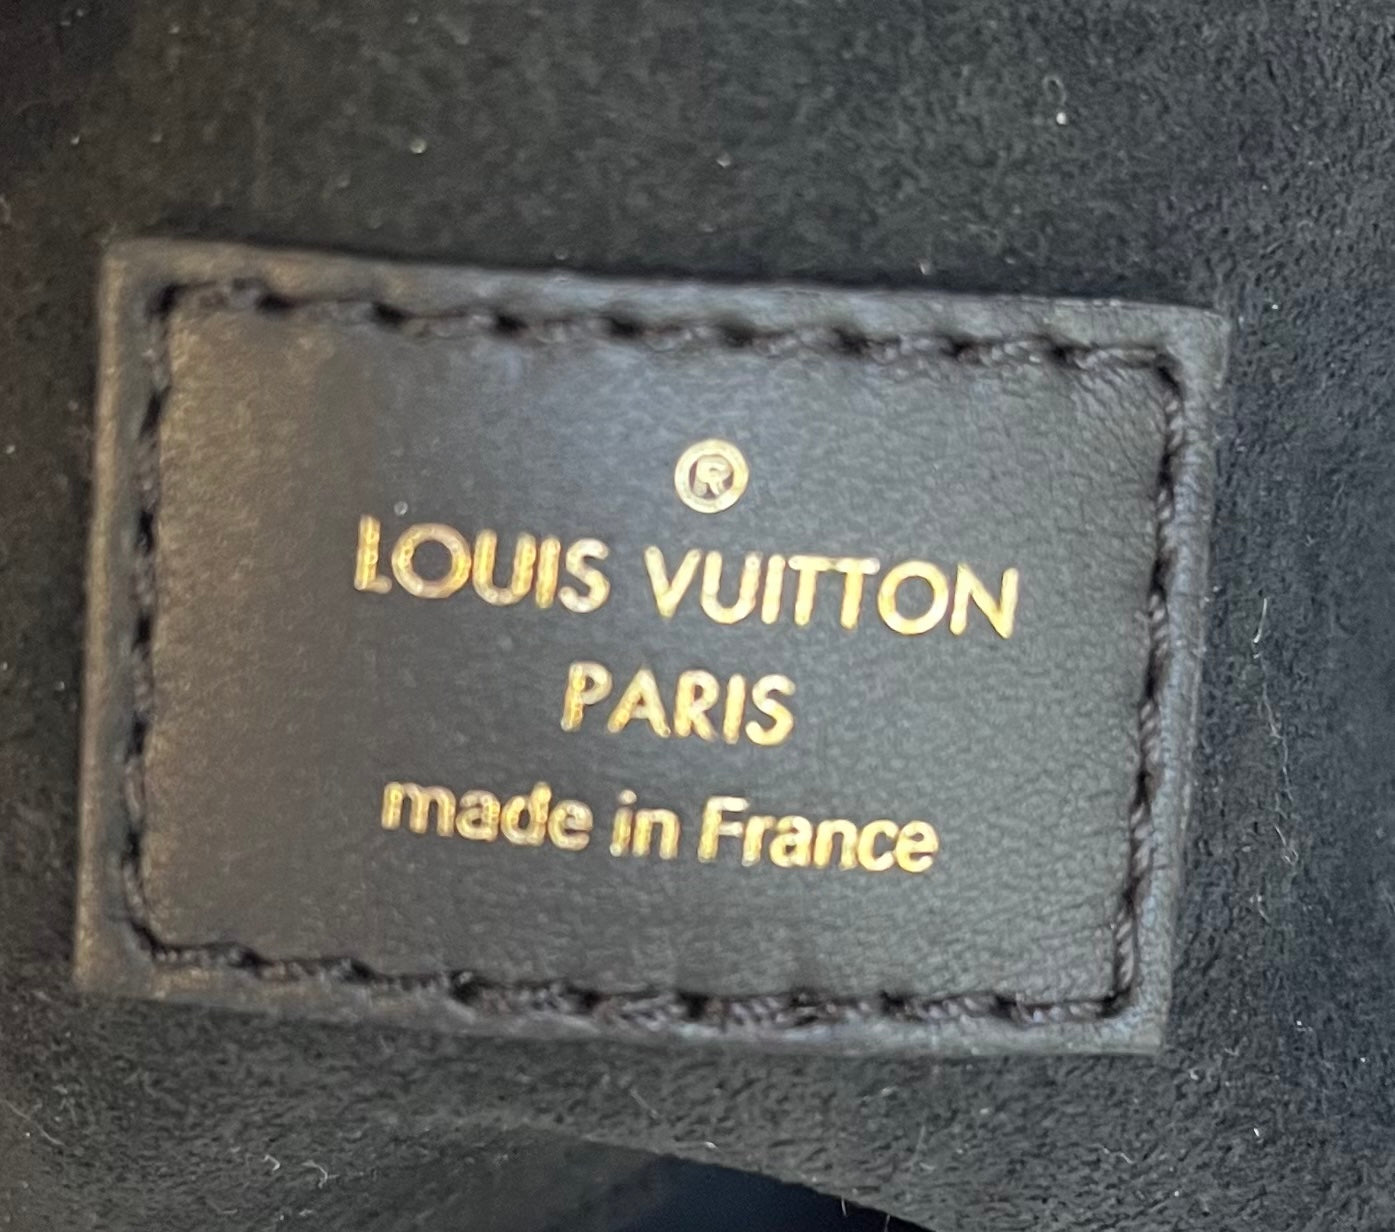 Louis Vuitton Bag Date Code Reference Guide  Miss Bugis